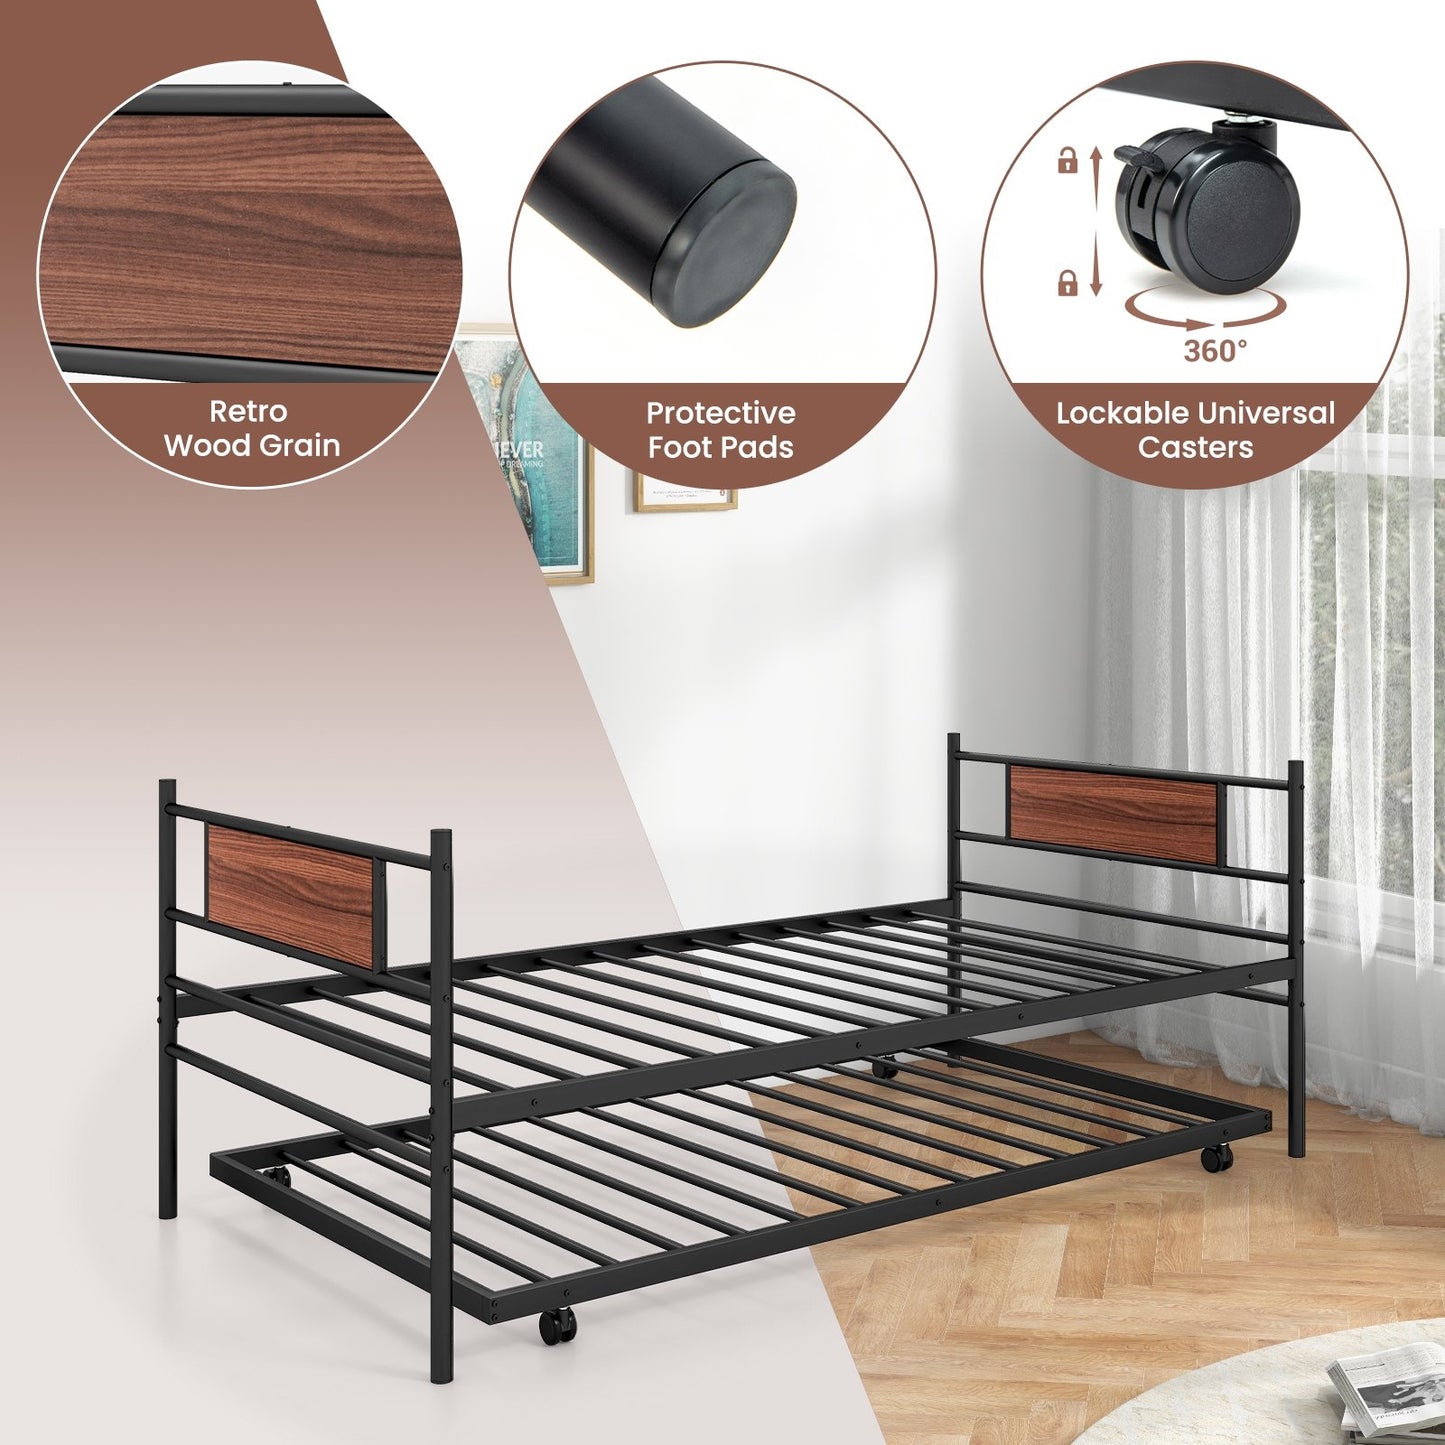 Twin Size Metal Daybed with Trundle and Wood Grain Headboard, Black